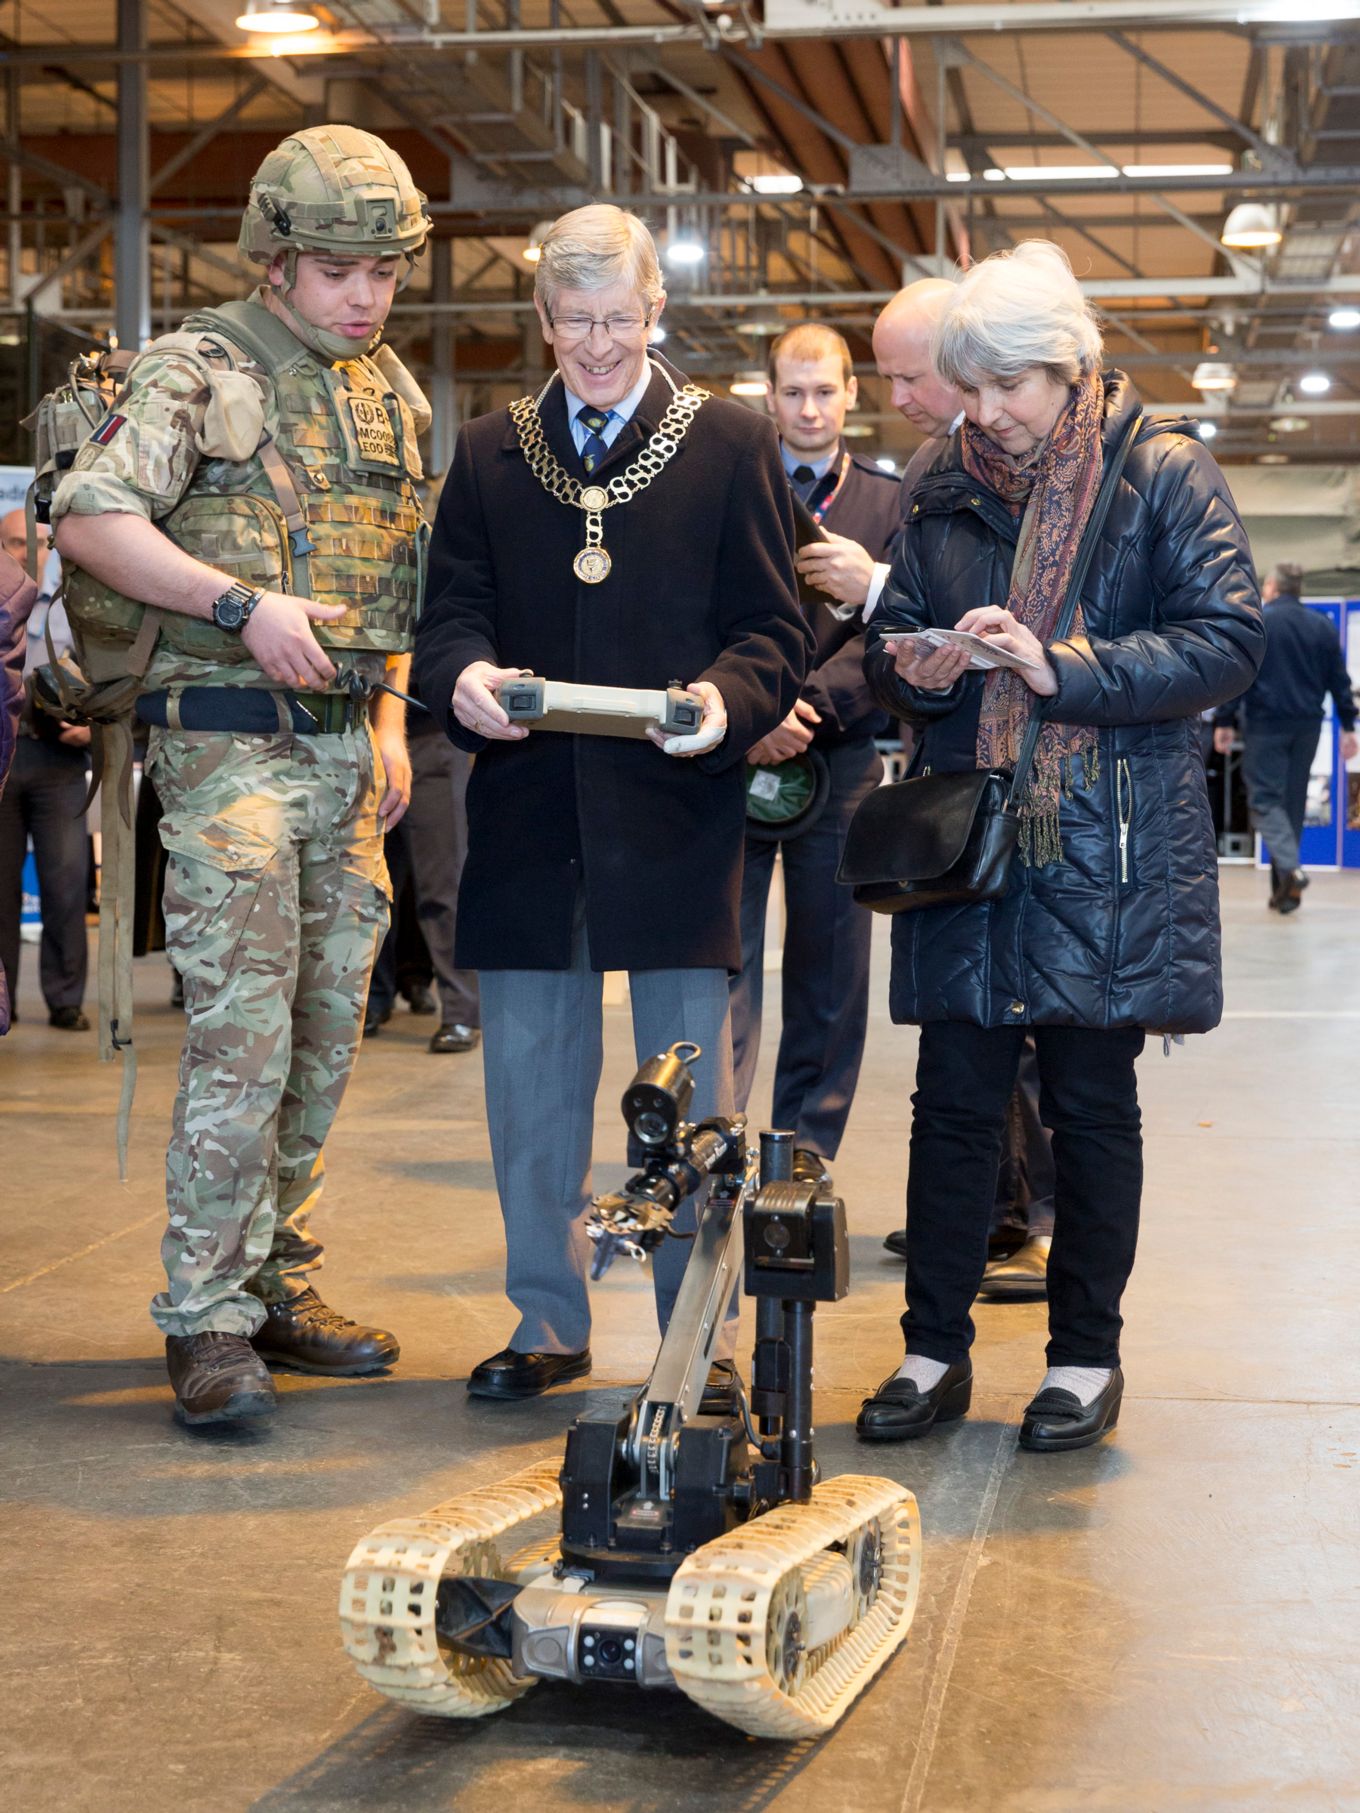 Cllr Story is shown one of the robots from no 5131 Bomb Disposal Squadron